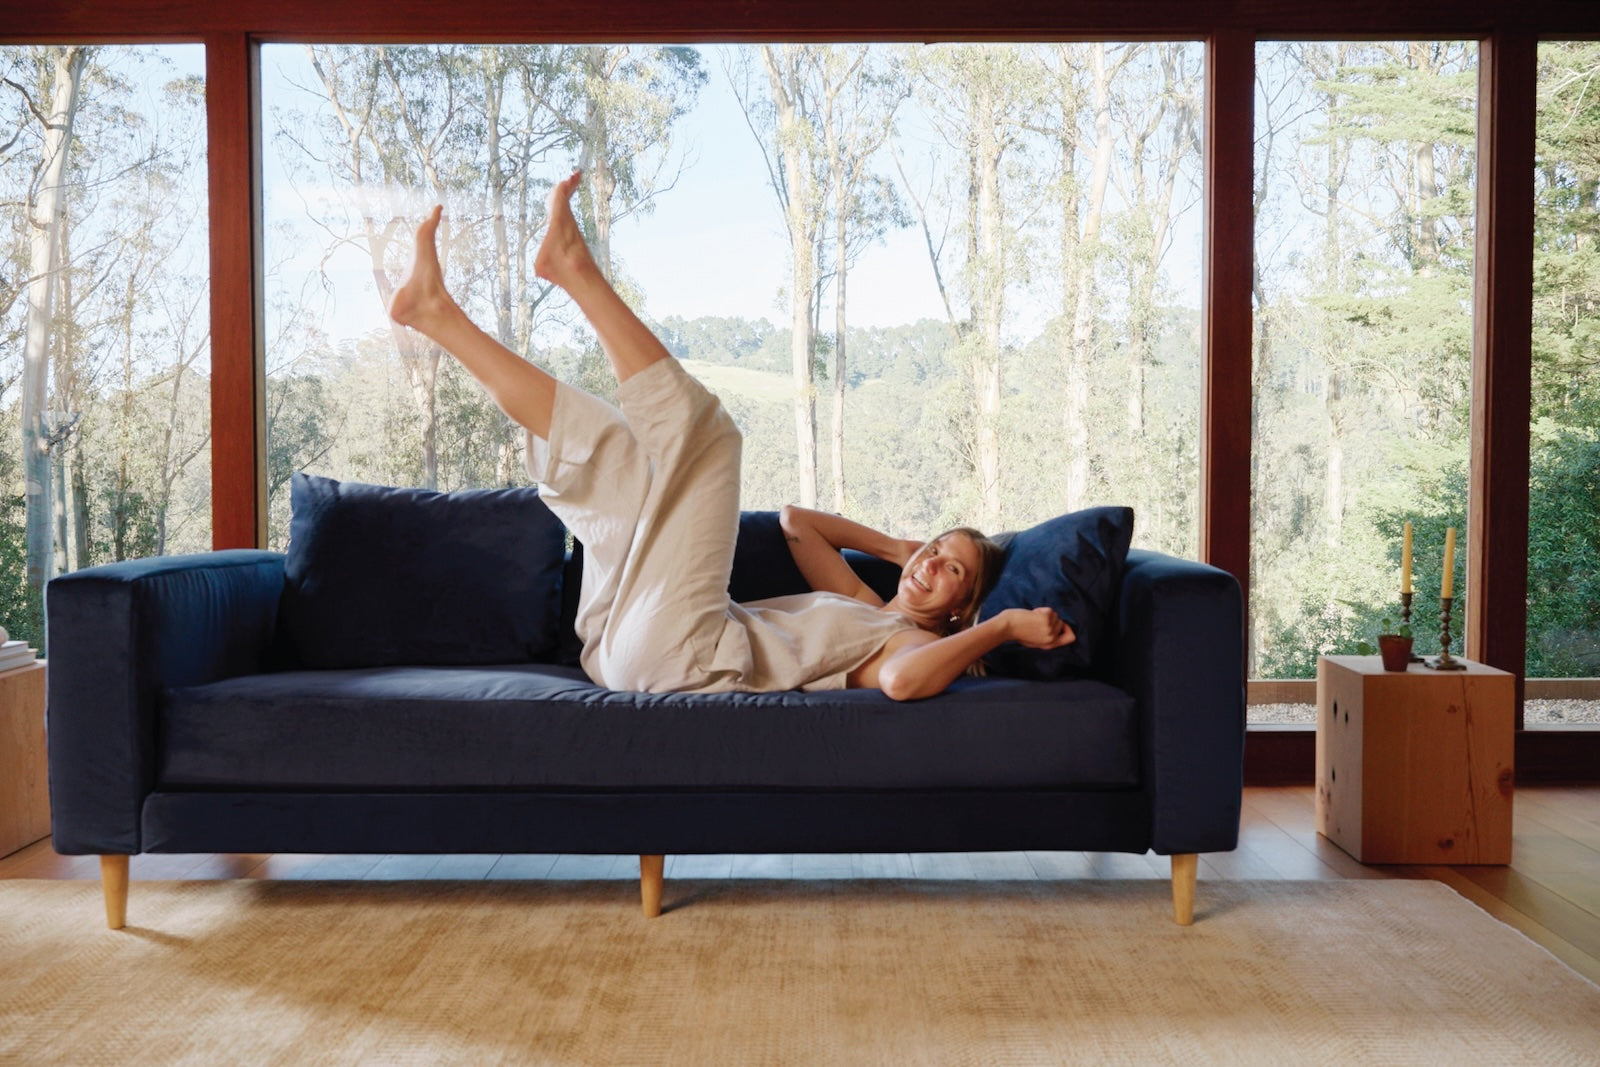 A woman wearing a cream-colored outfit is lying playfully on a navy-blue sofa with her legs raised. She is smiling, and large windows behind her showcase a scenic view of trees and a hillside. Candles and a small plant are on a wooden box to the right of the sofa.